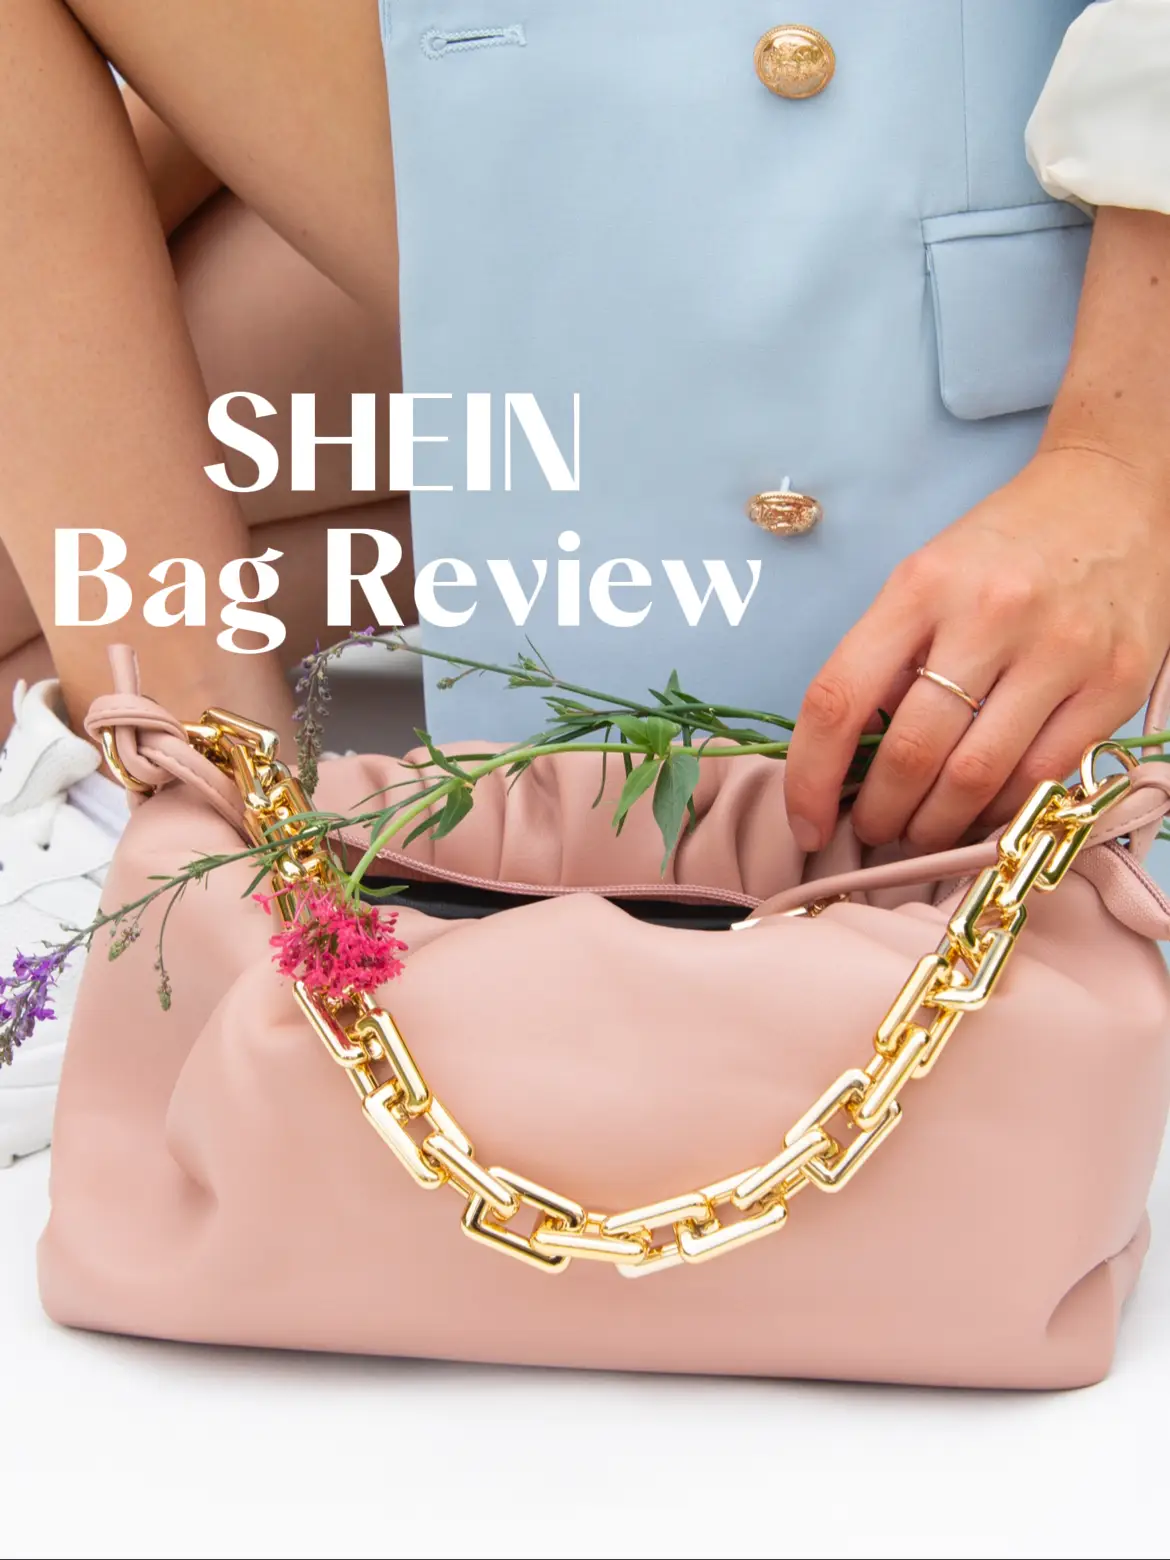 SHEIN Bag Review 🌷, Gallery posted by Becki Ball